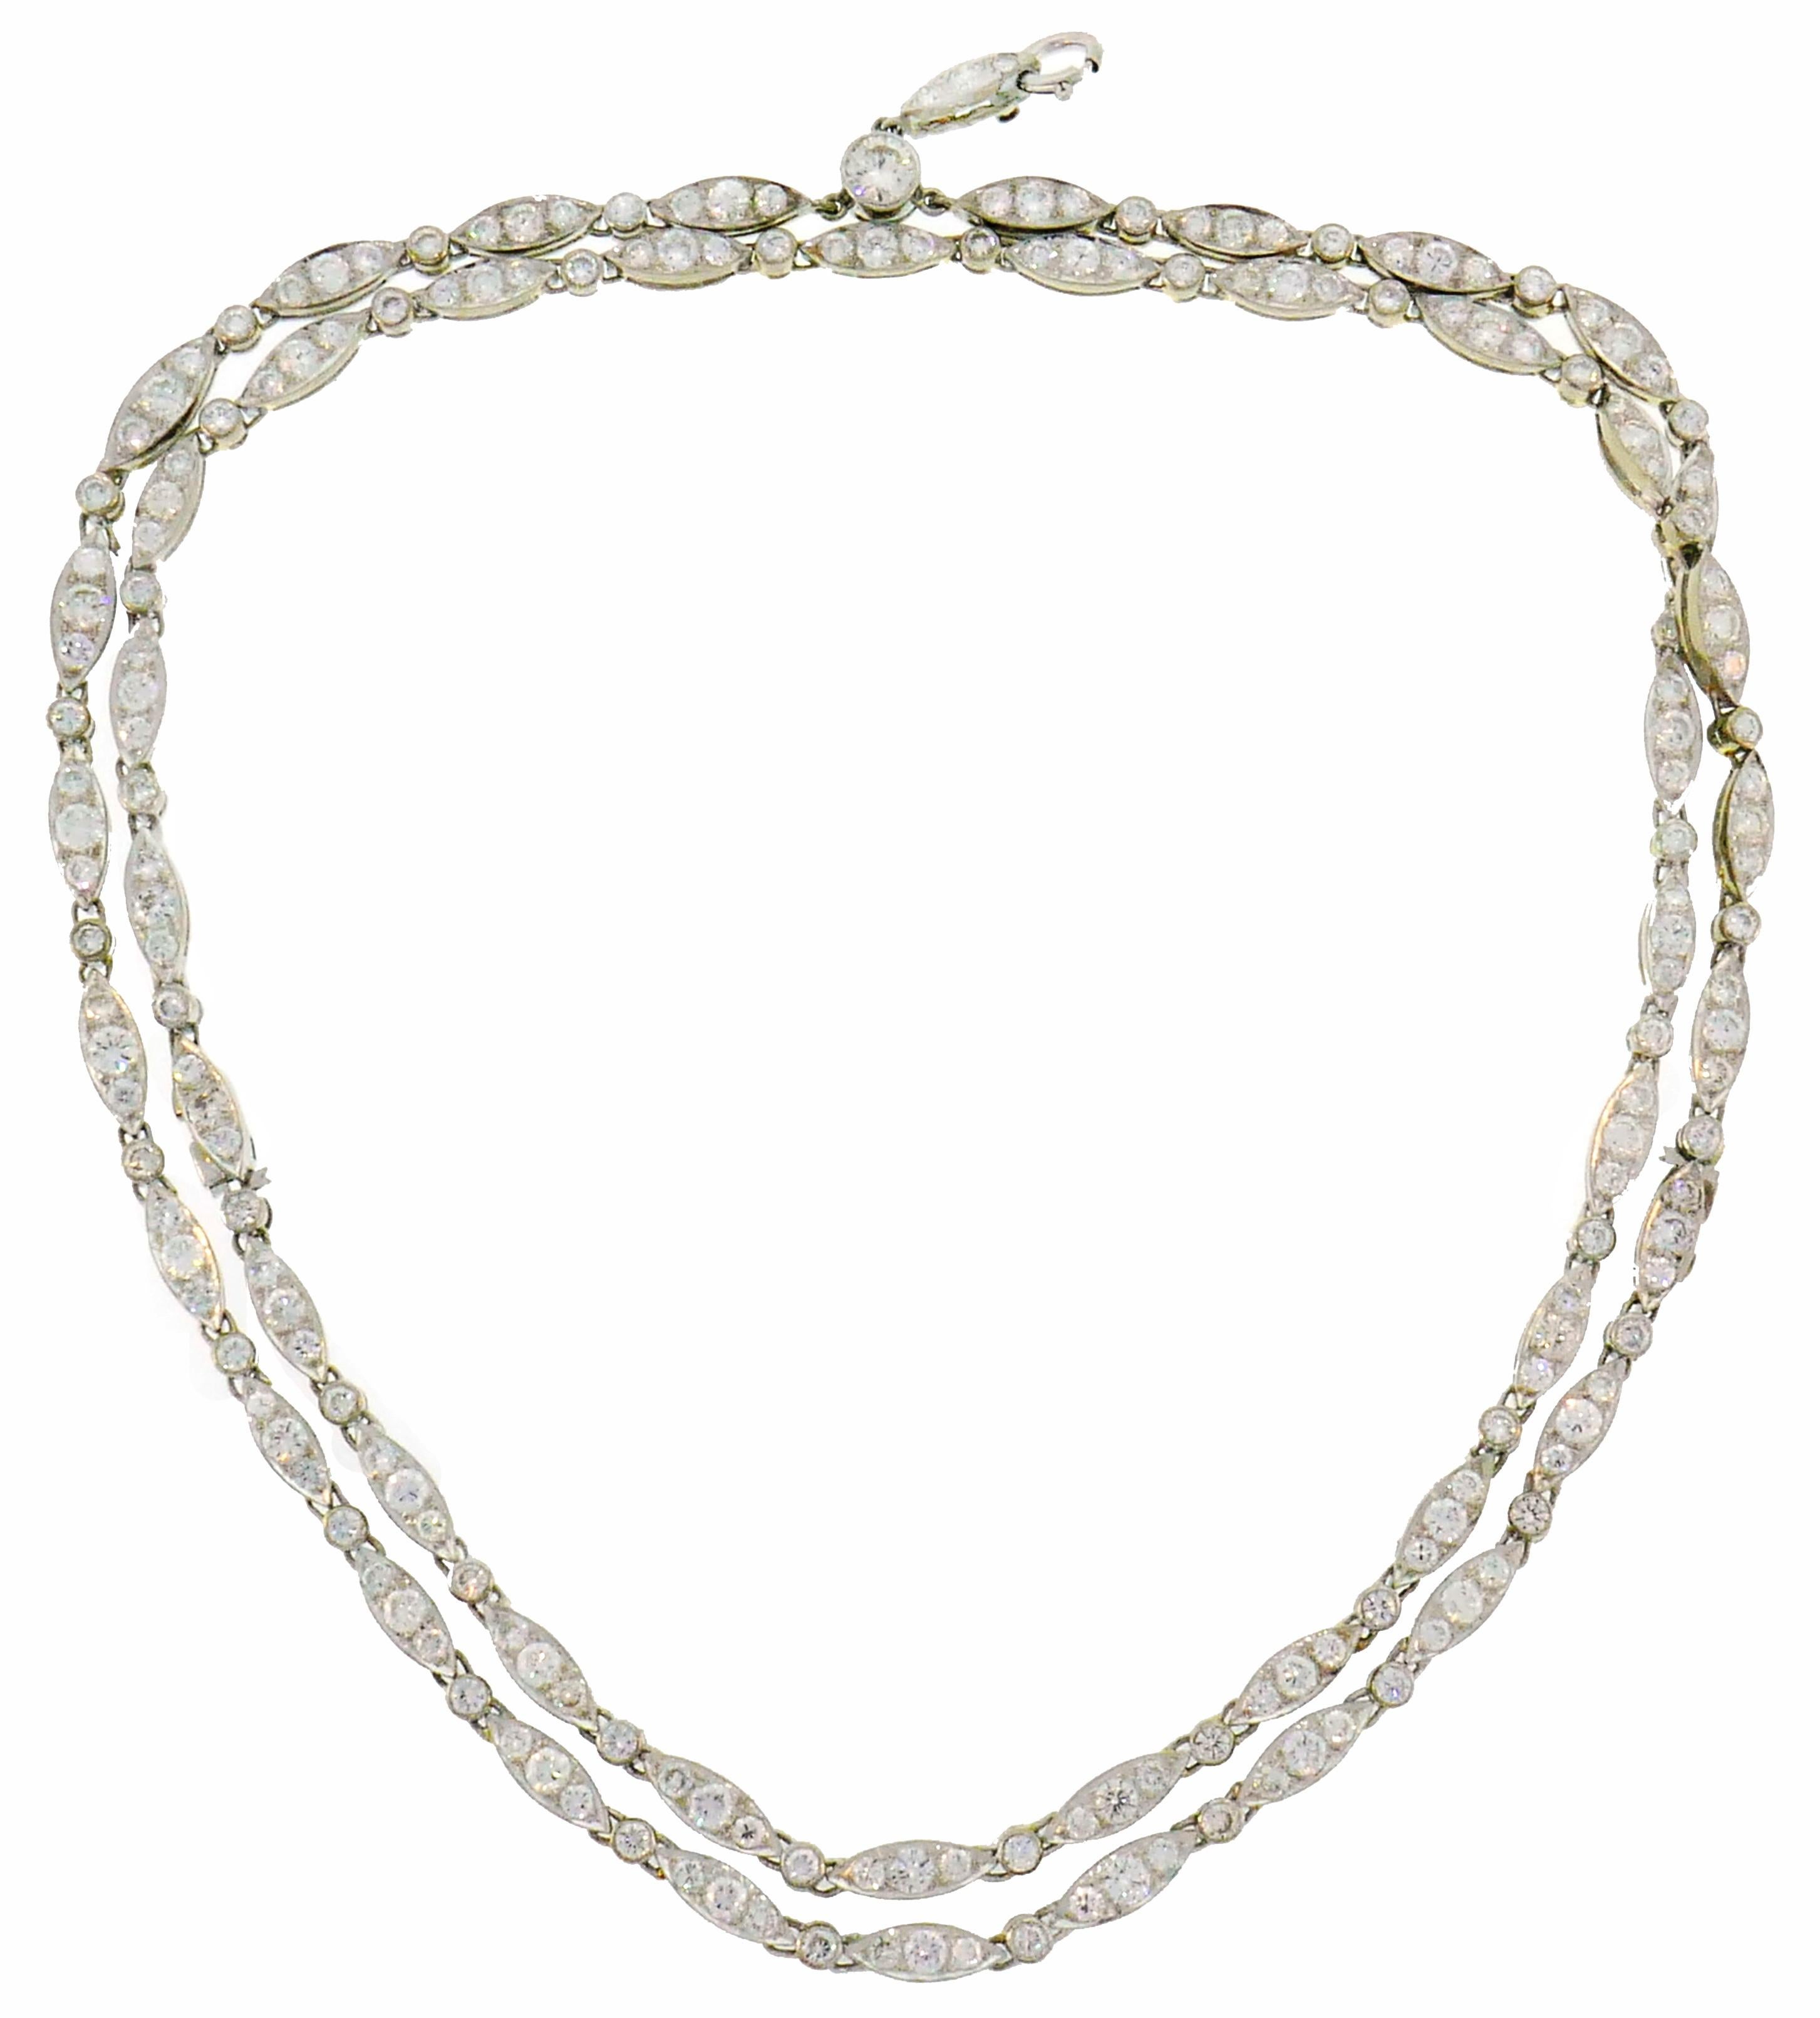 Round Cut Diamond White Gold Necklace Bracelet with Marquise Link, 1960s